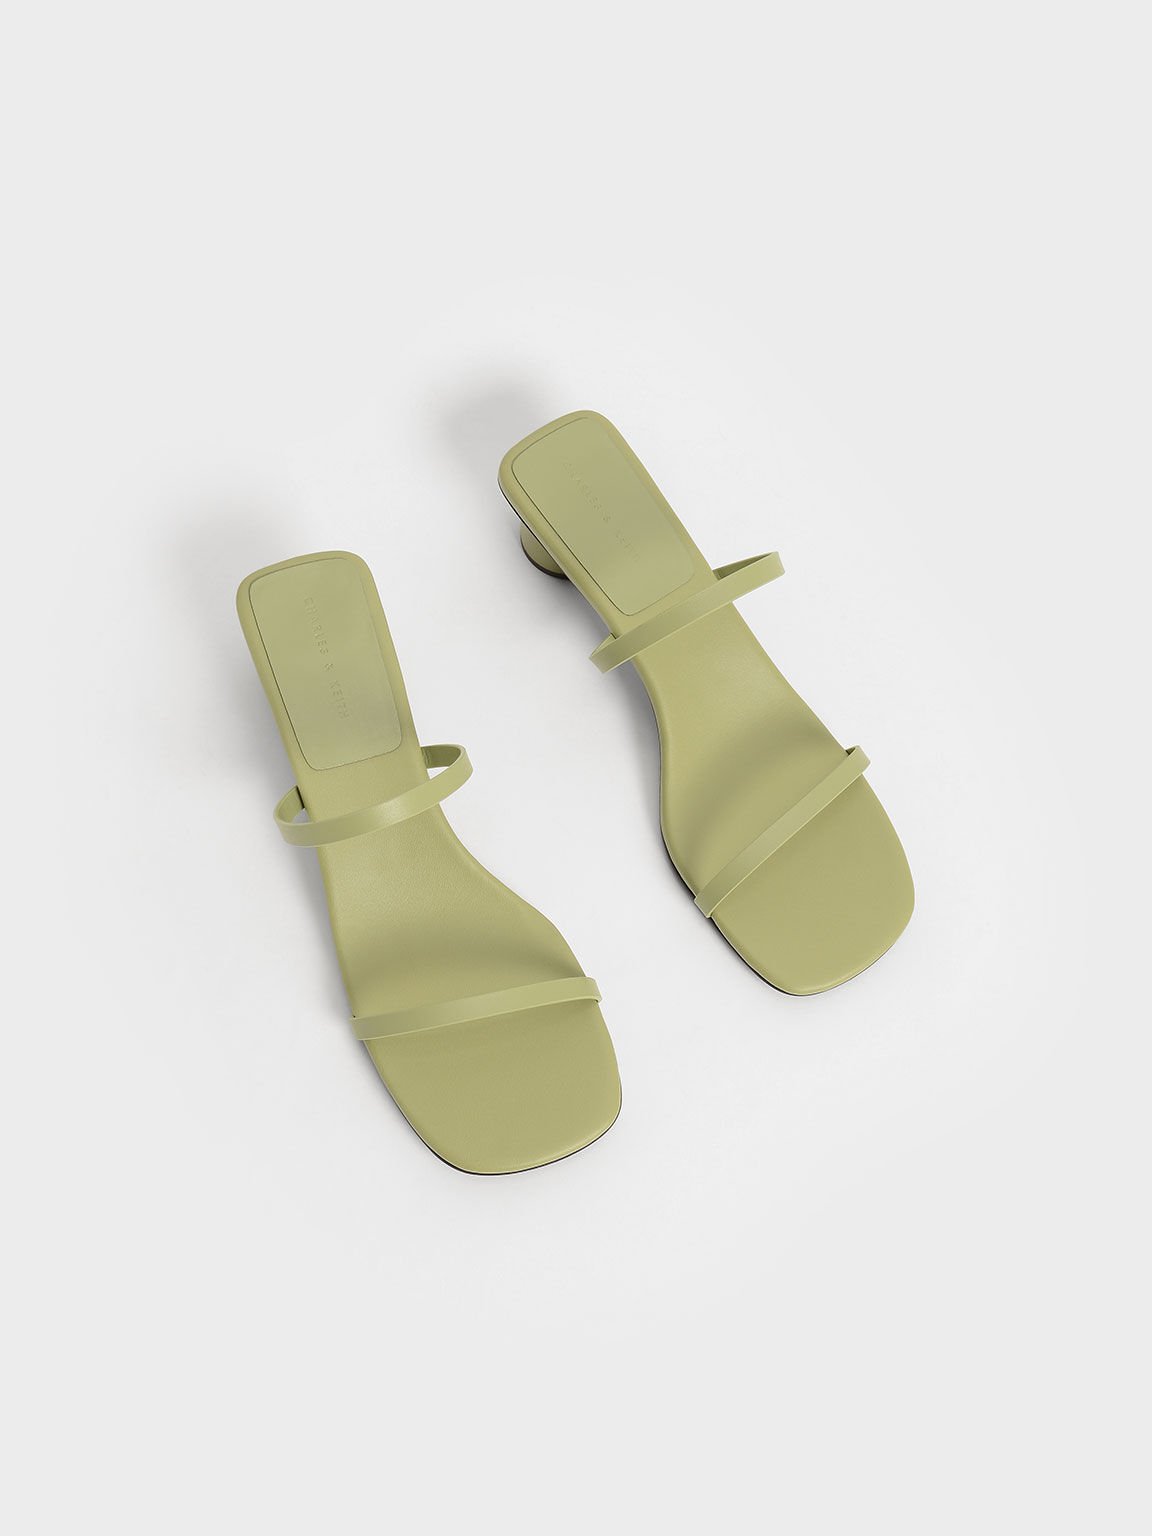 Sandal Double Strap Cylindrical Heel Mules, Sage Green, hi-res